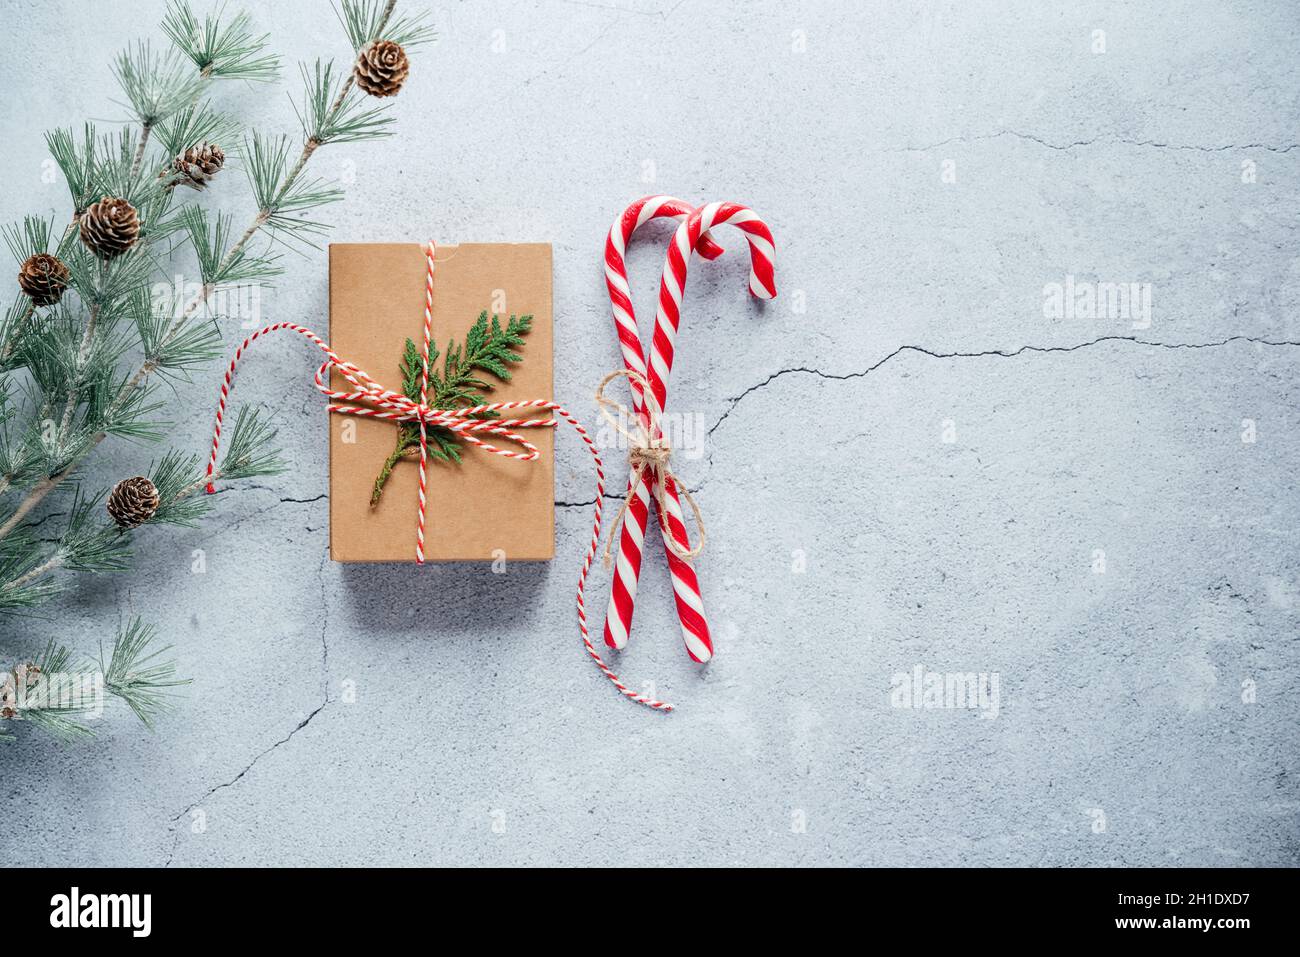 New Year composition with Christmas gift box, pine cones, and thuja branches on gray cement background with copy space Stock Photo